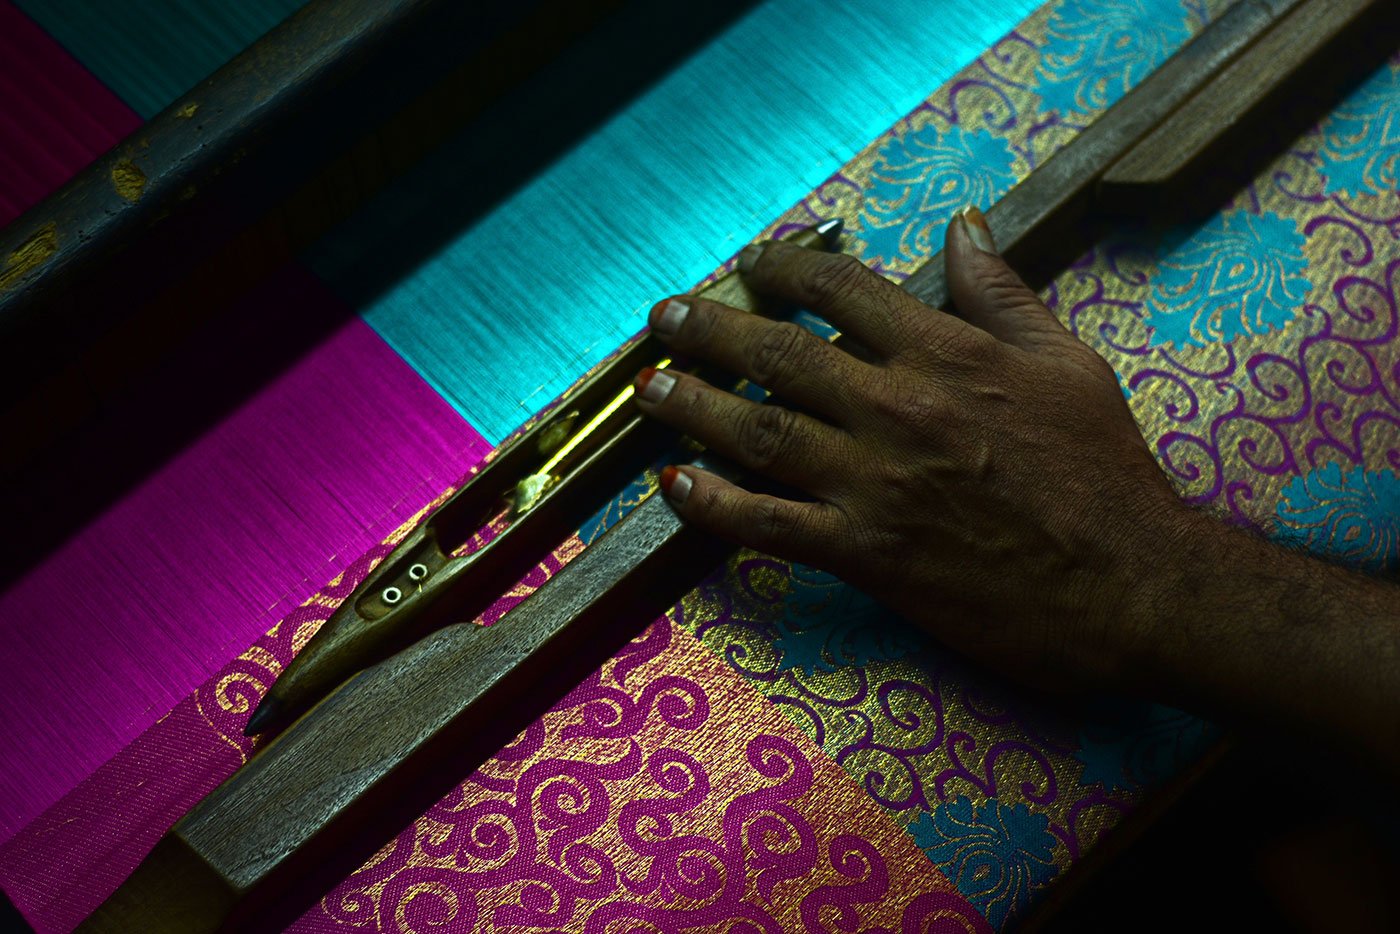 A man weaving on the machine